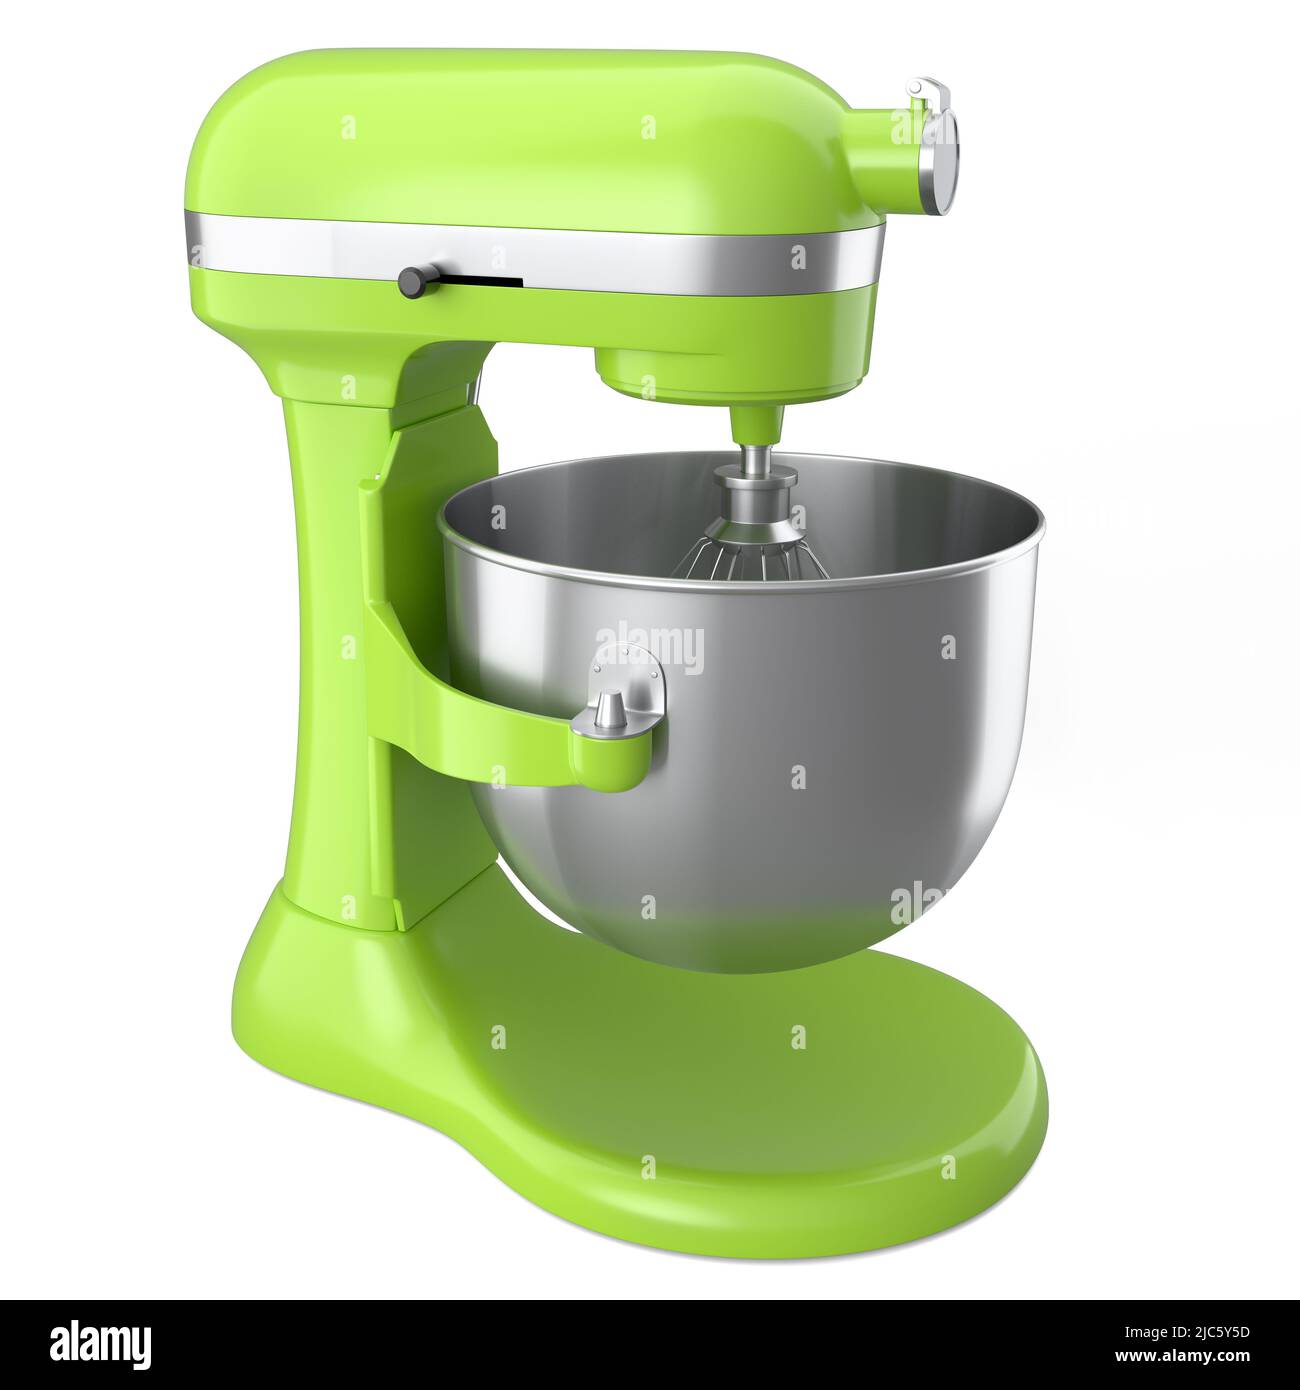 https://c8.alamy.com/comp/2JC5Y5D/modern-kitchen-mixer-for-baking-on-a-white-background-3d-render-of-home-kitchen-tools-and-accessories-for-cooking-blending-and-mixing-2JC5Y5D.jpg